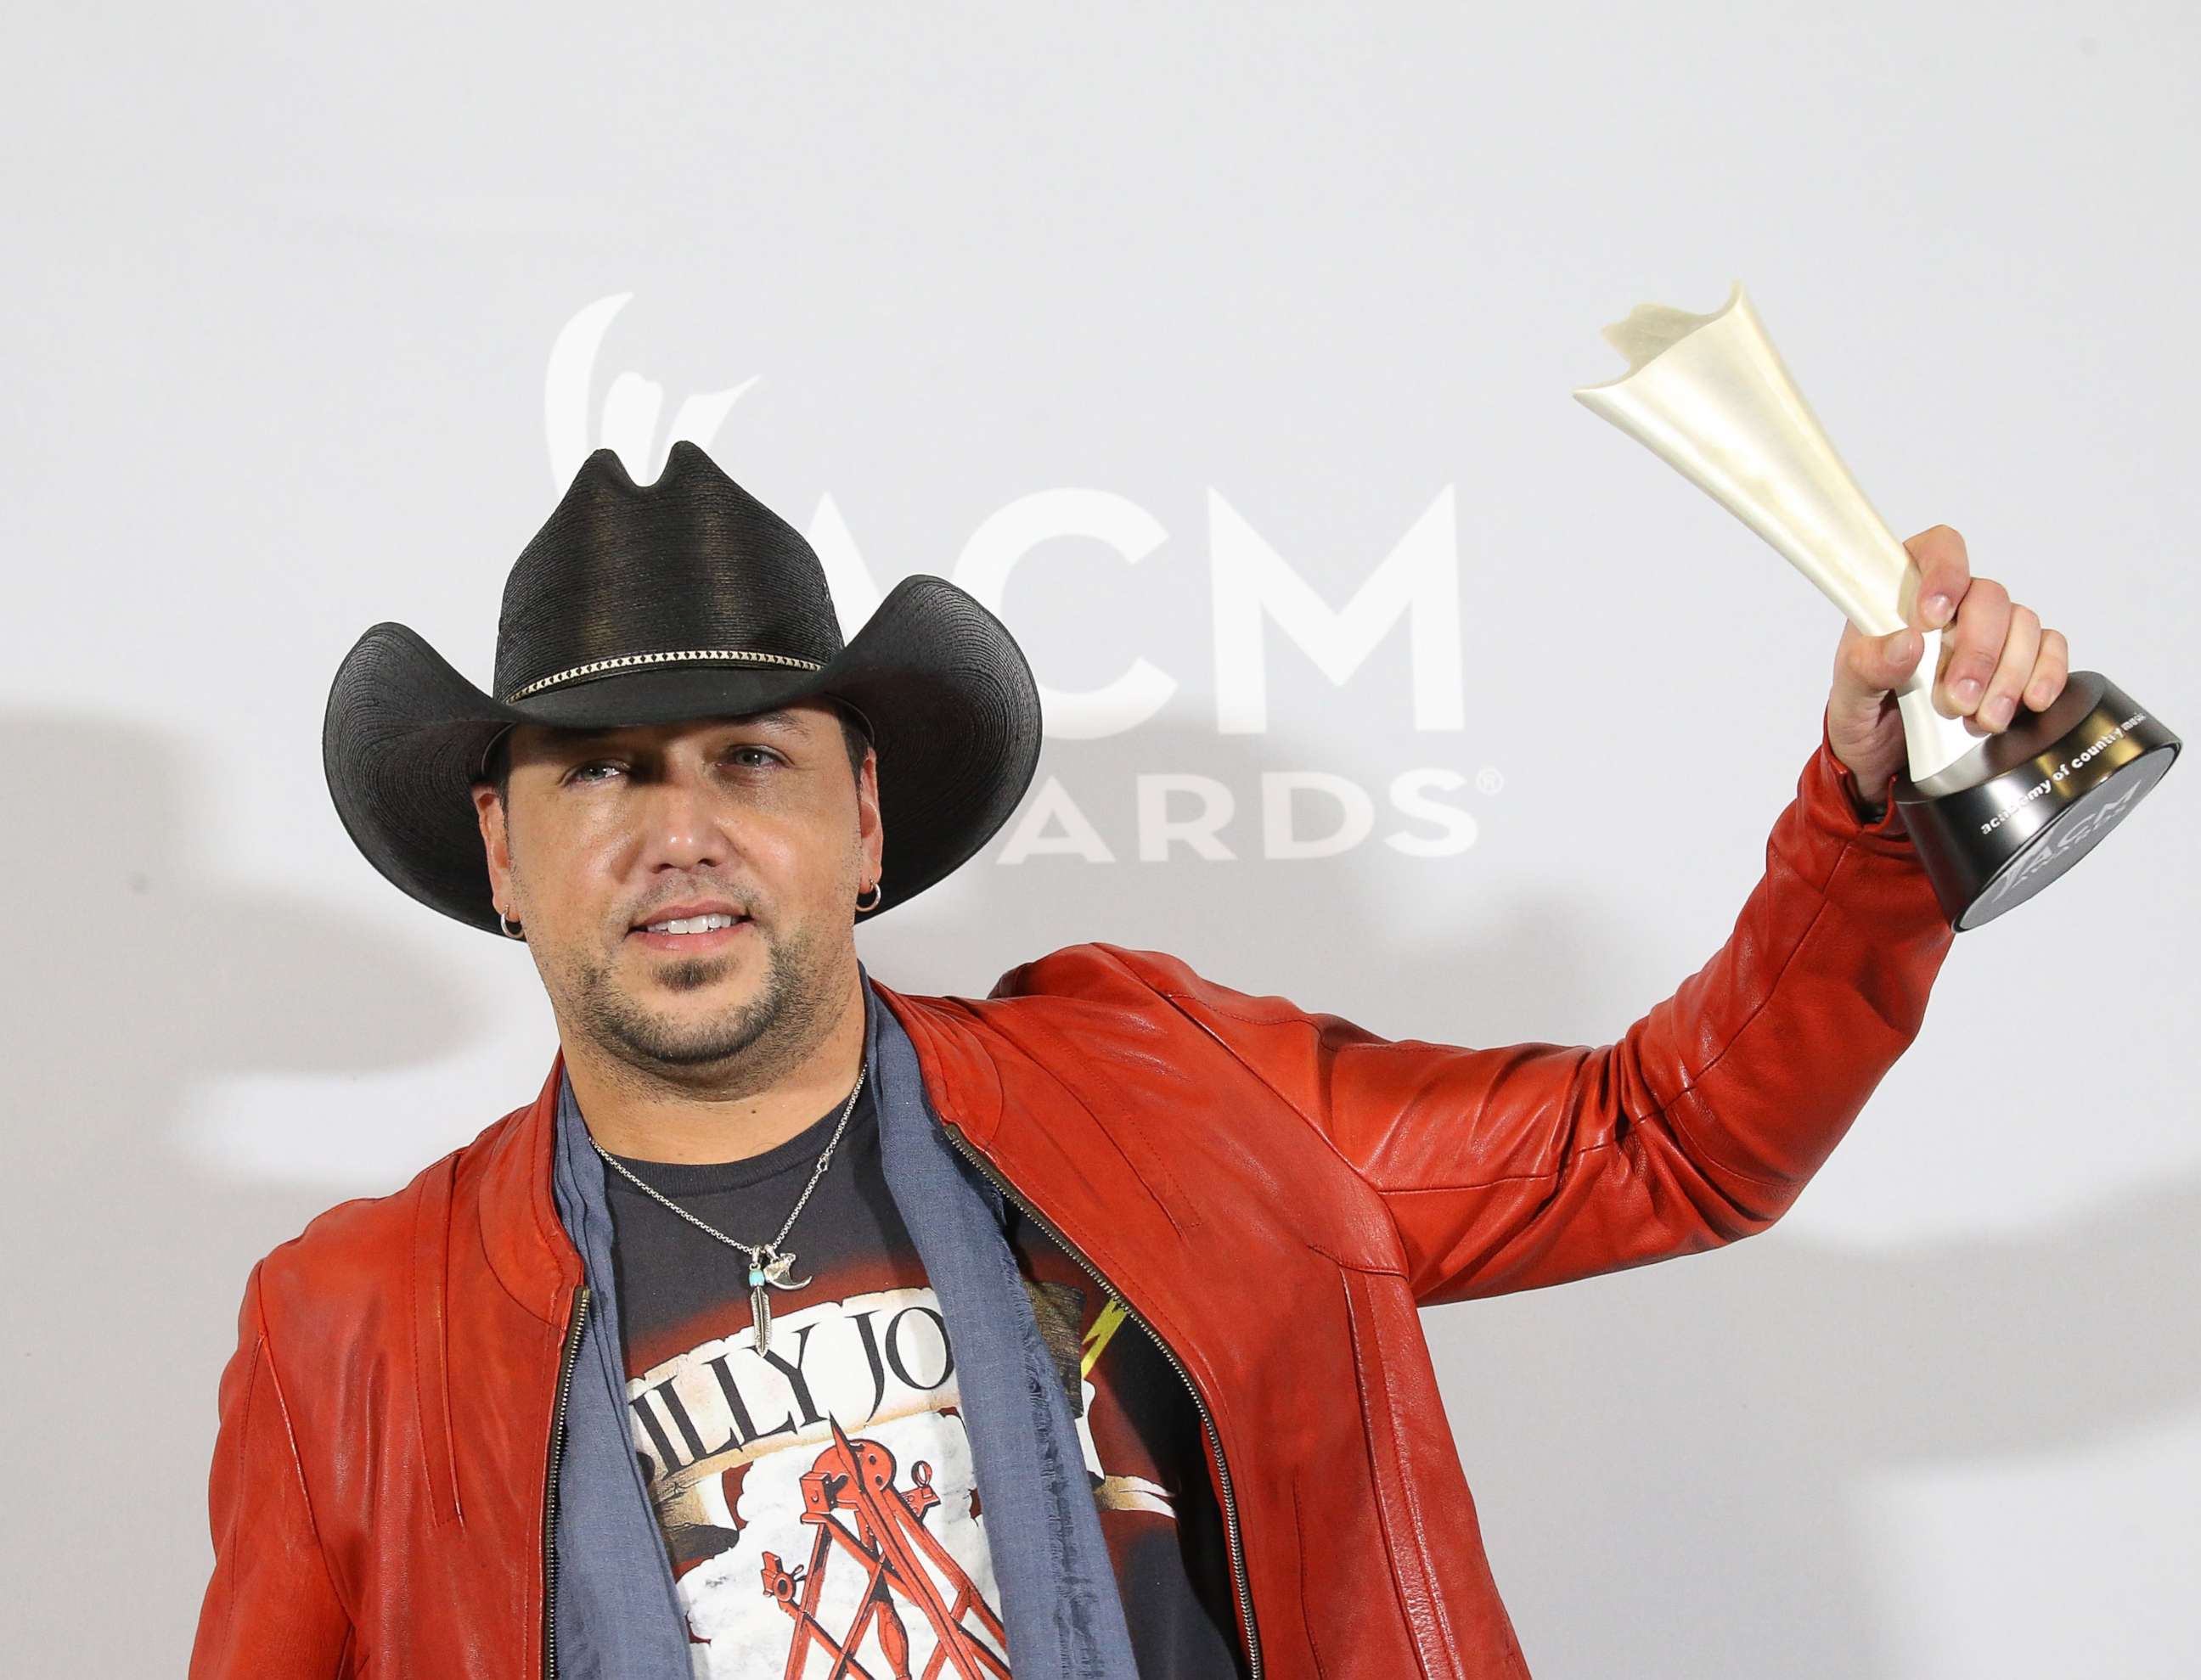 PHOTO: Jason Aldean poses inside the press room at the 52nd Academy of Country Music Awards held at T-Mobile Arena, in this file photo dated April 2, 2017, in Las Vegas.